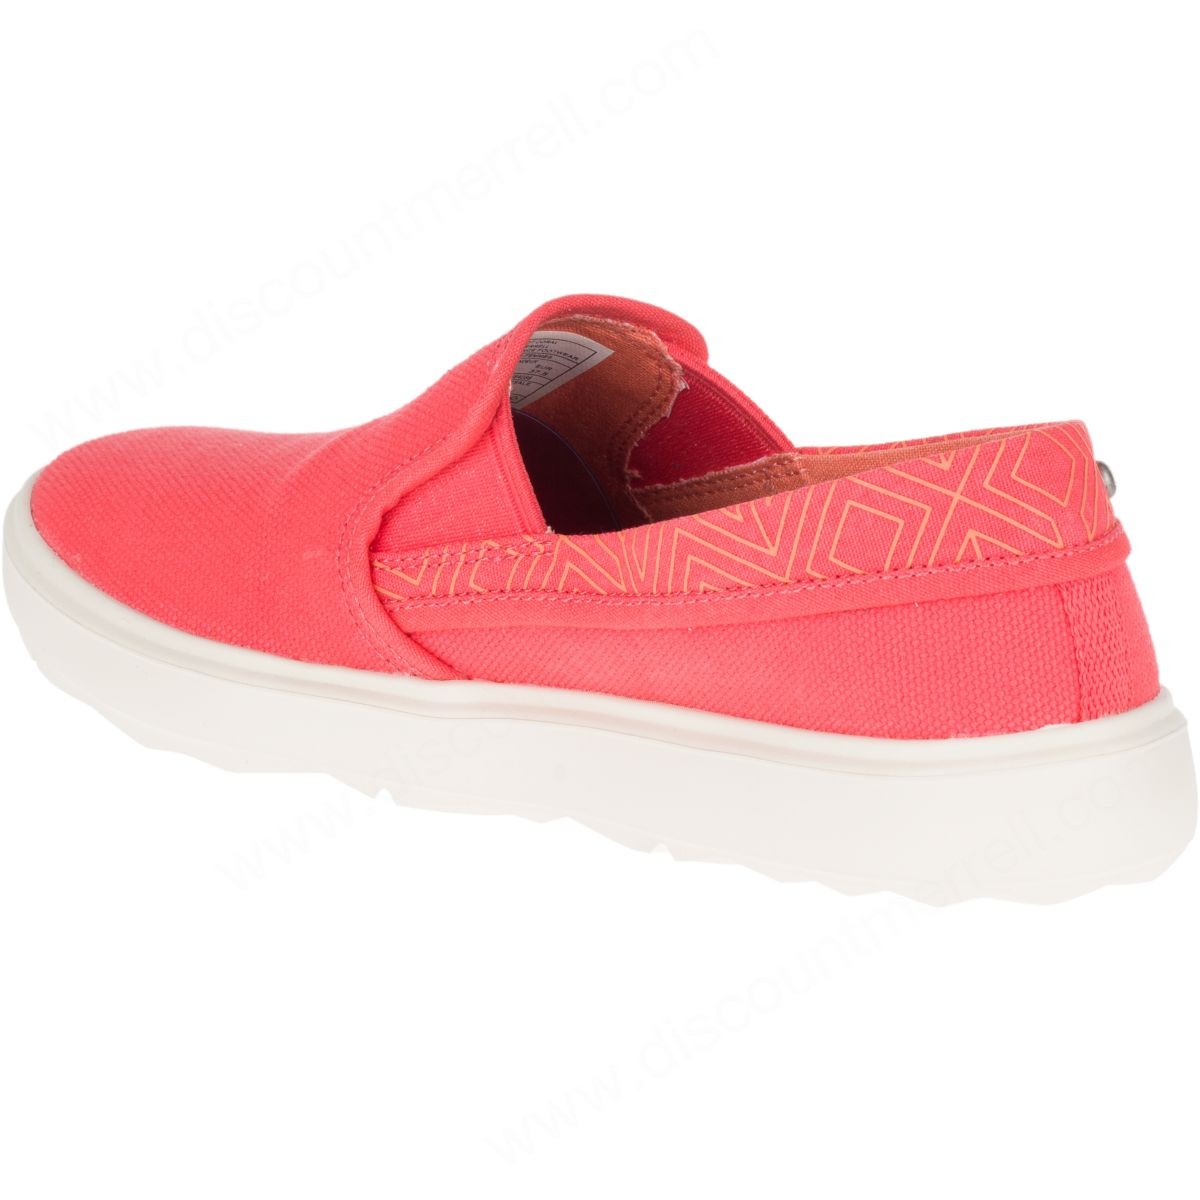 Merrell Woman's Around Town City Moc Canvas Hot Coral - -6